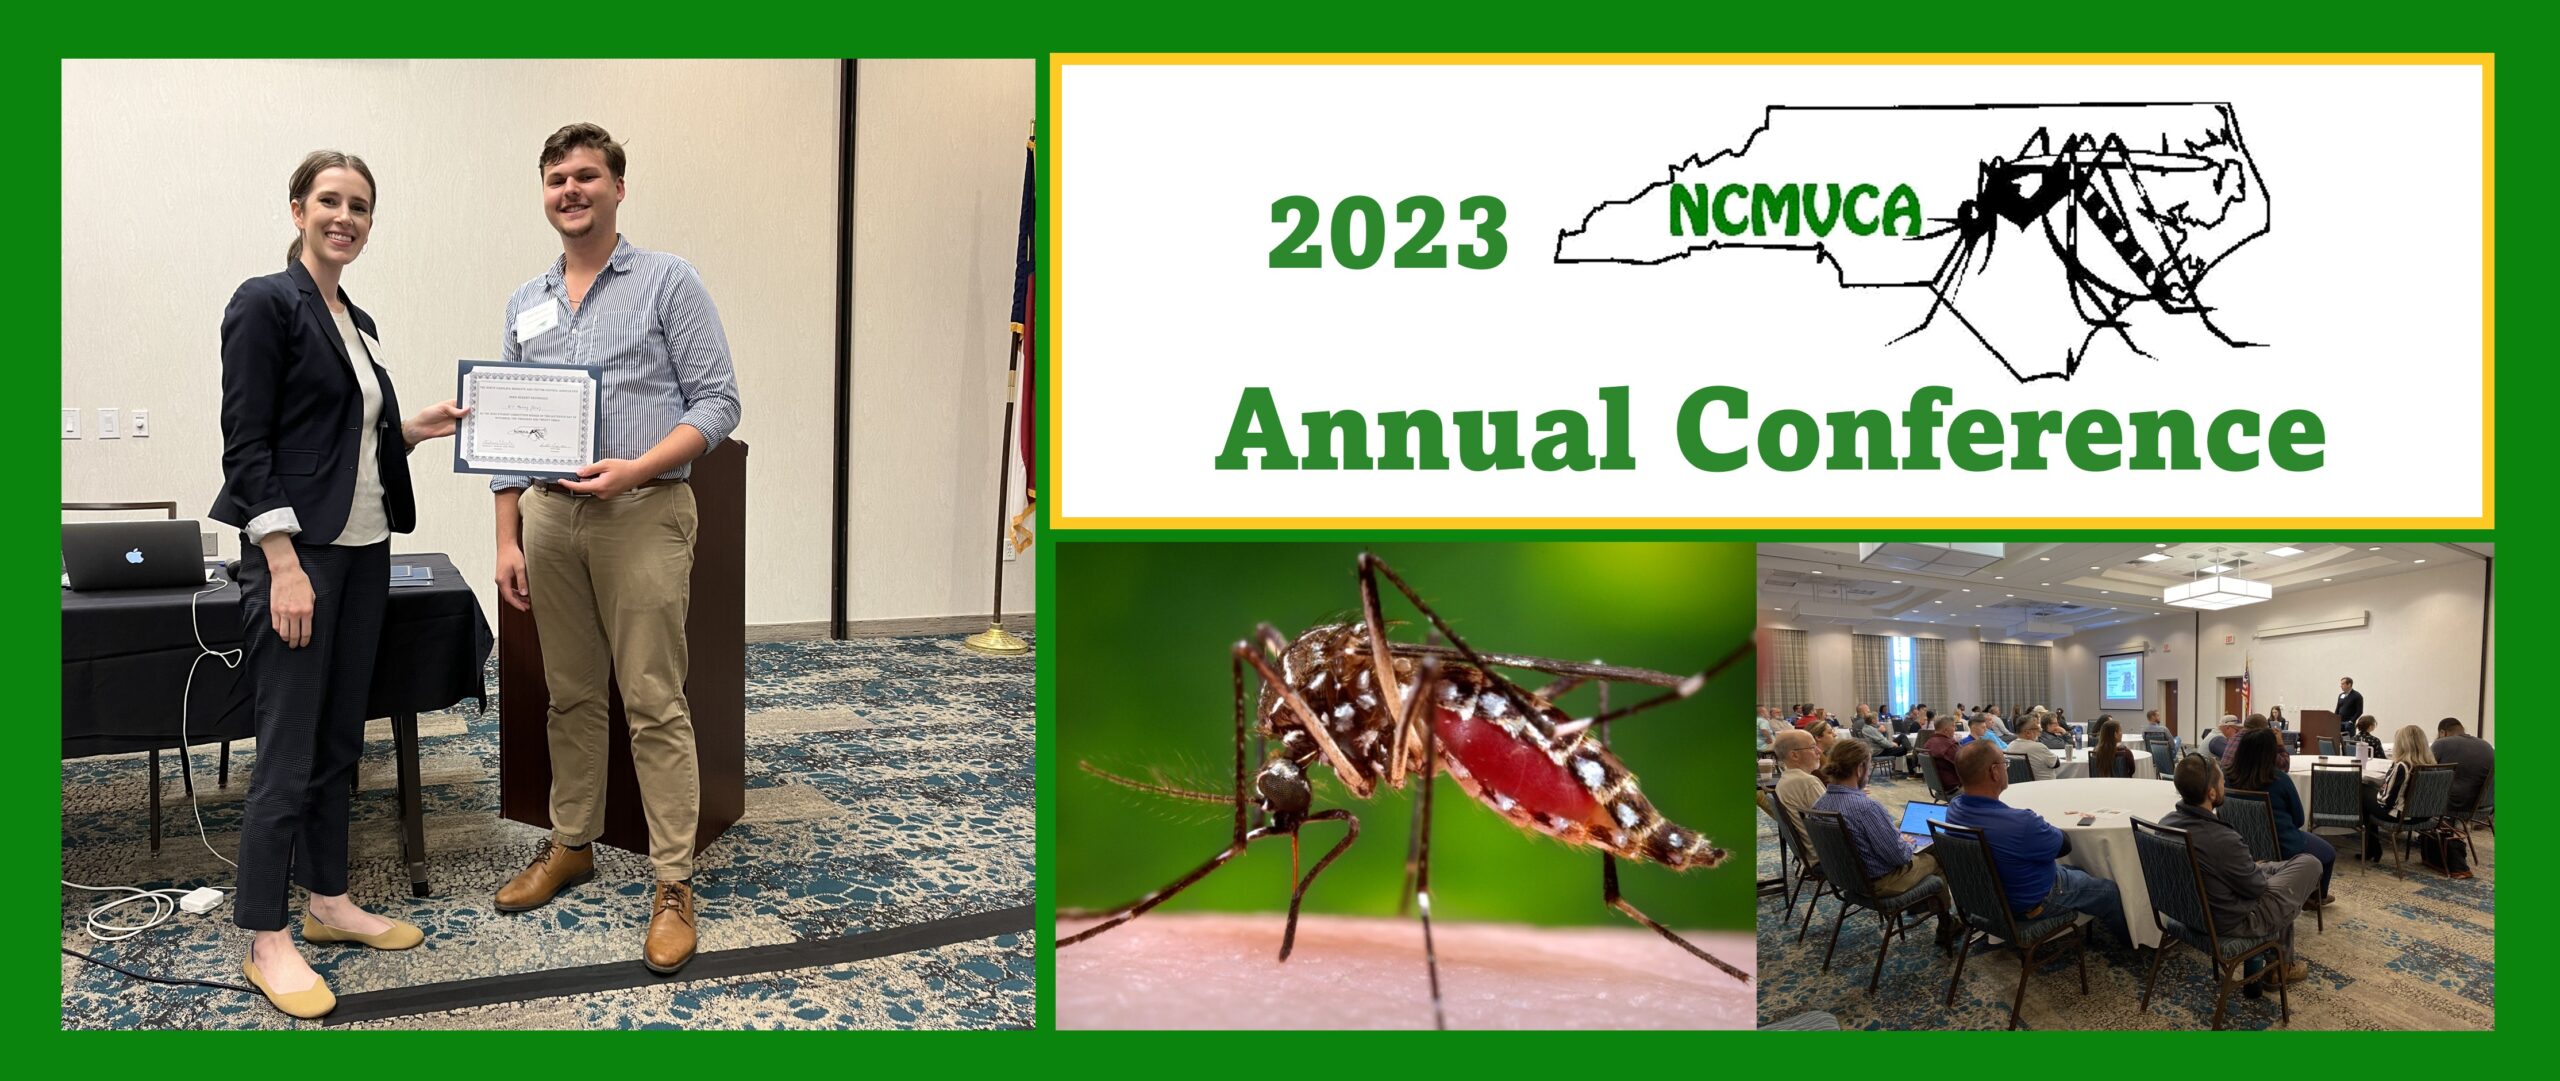 You are currently viewing MS Environmental Health Student Awarded in Annual NCMVCA 2023